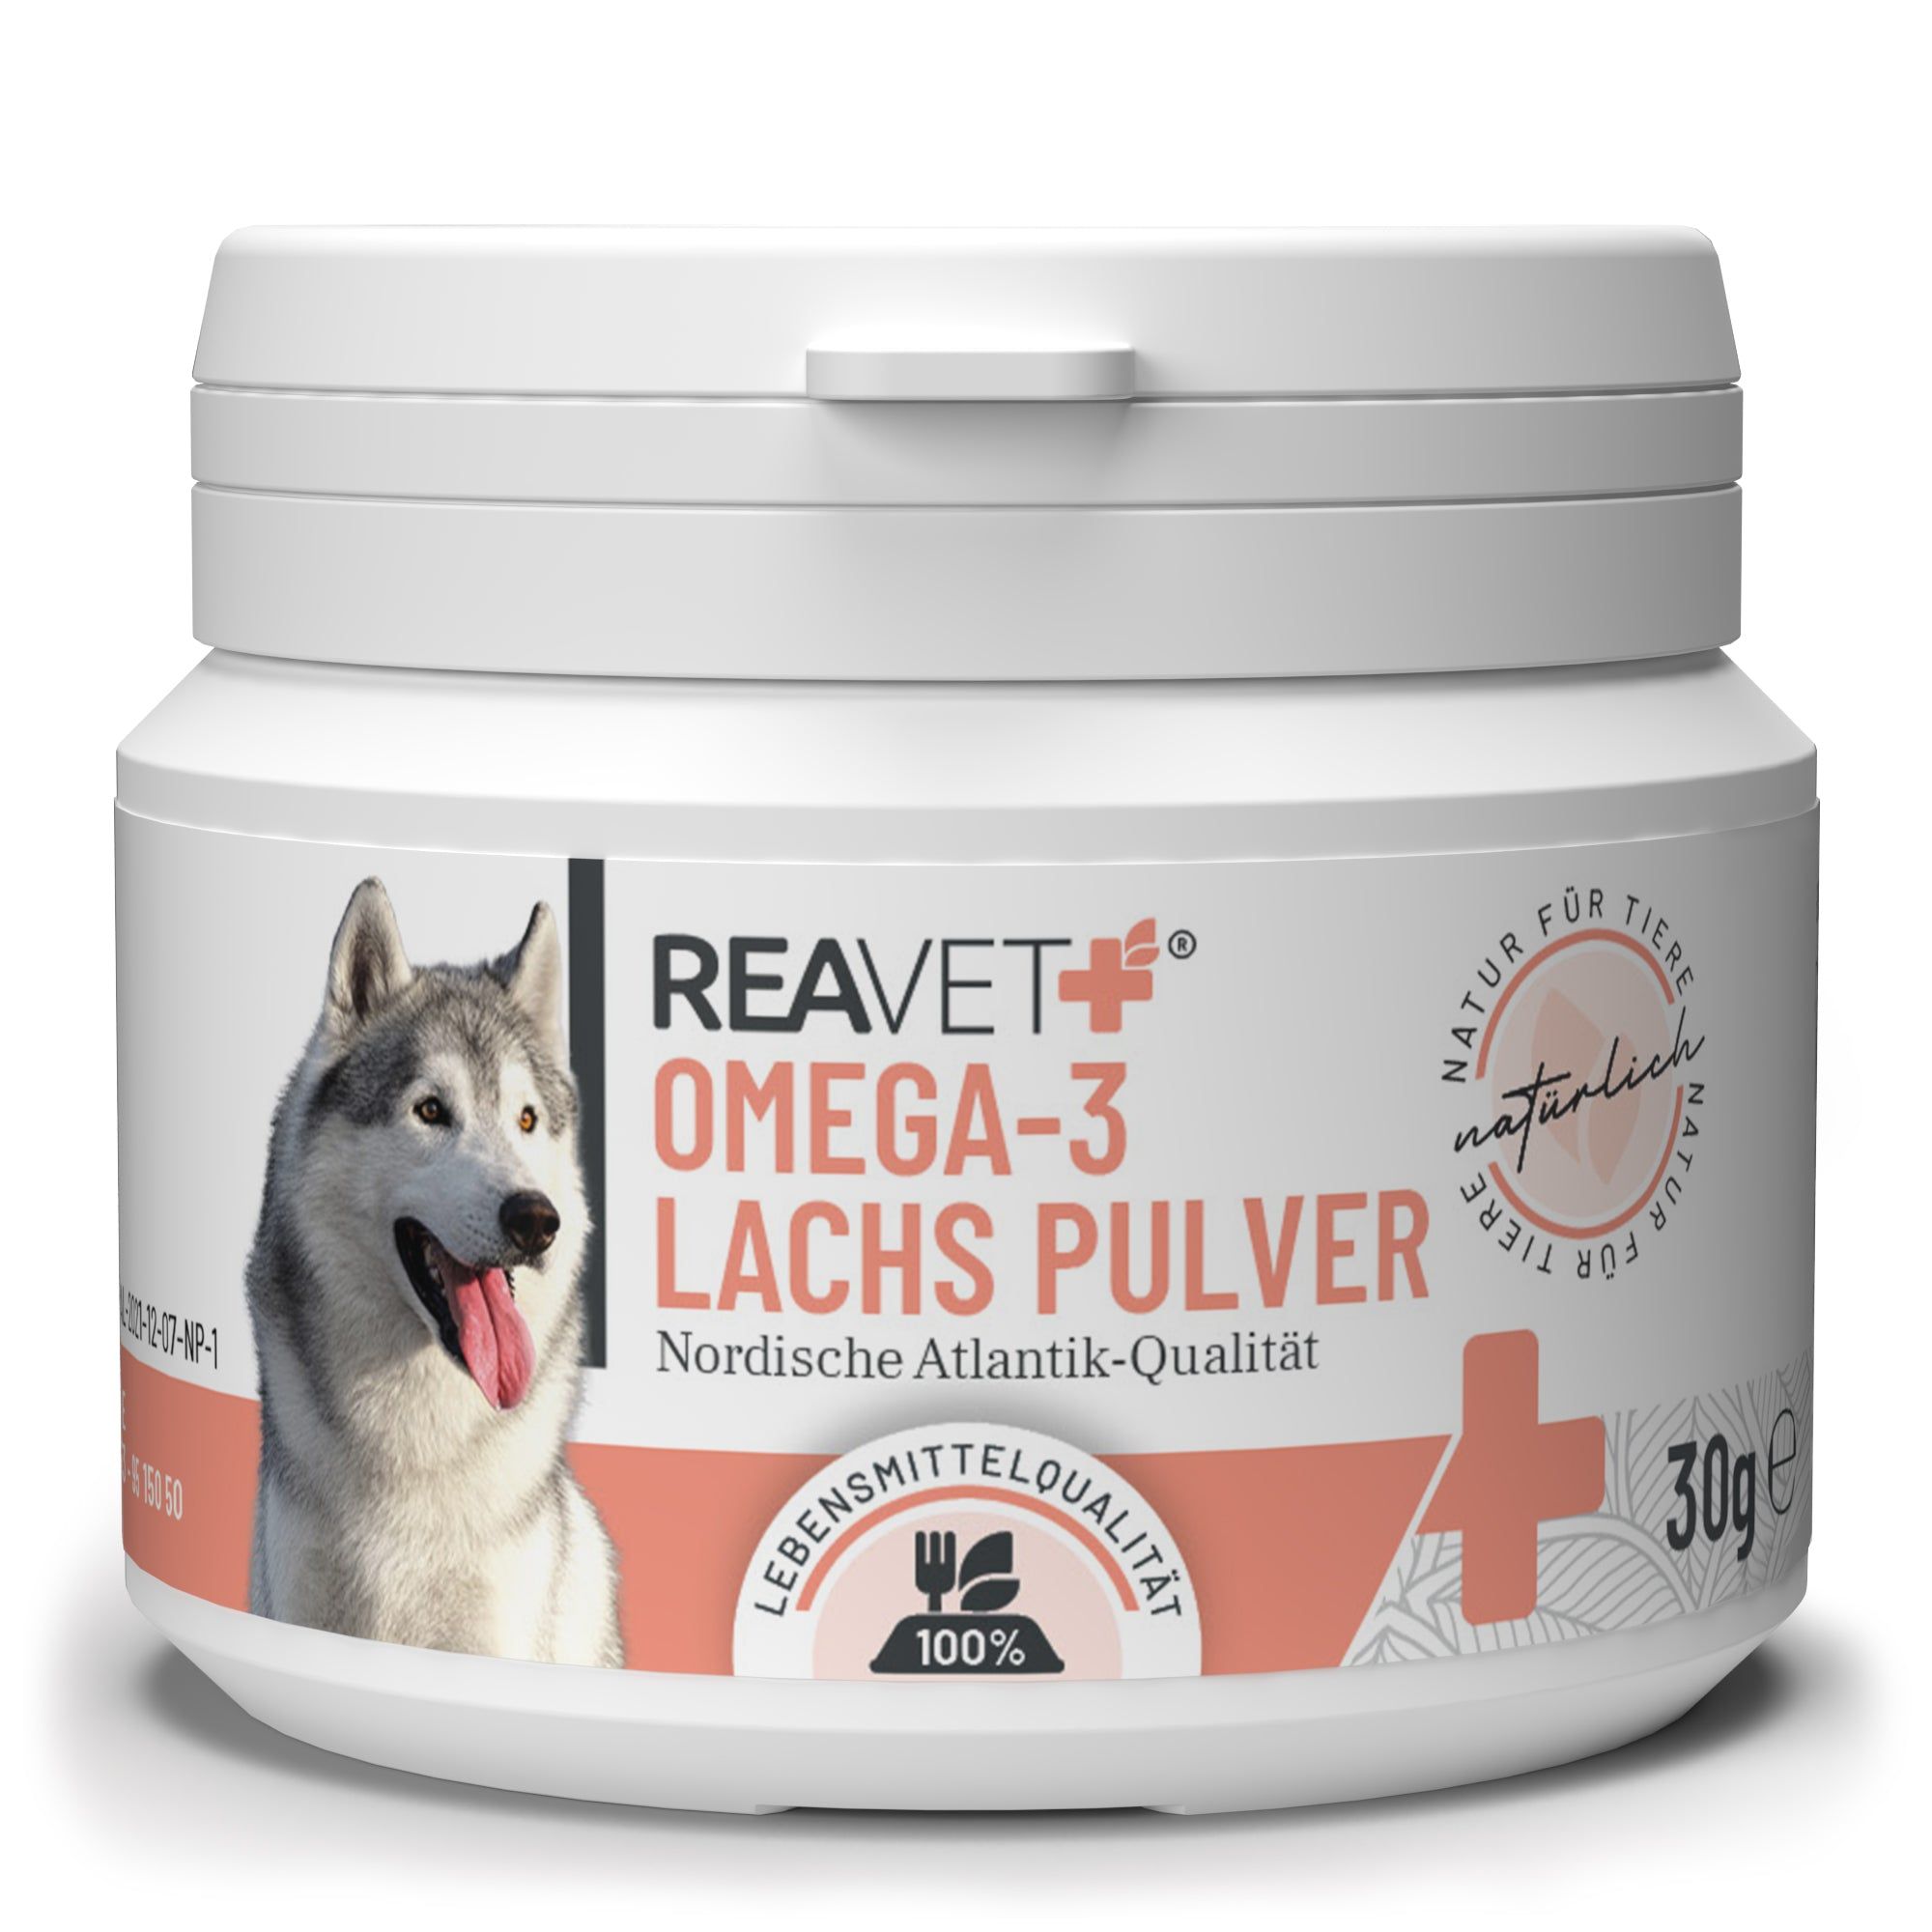 Omega-3 Lachs Pulver - ReaVET